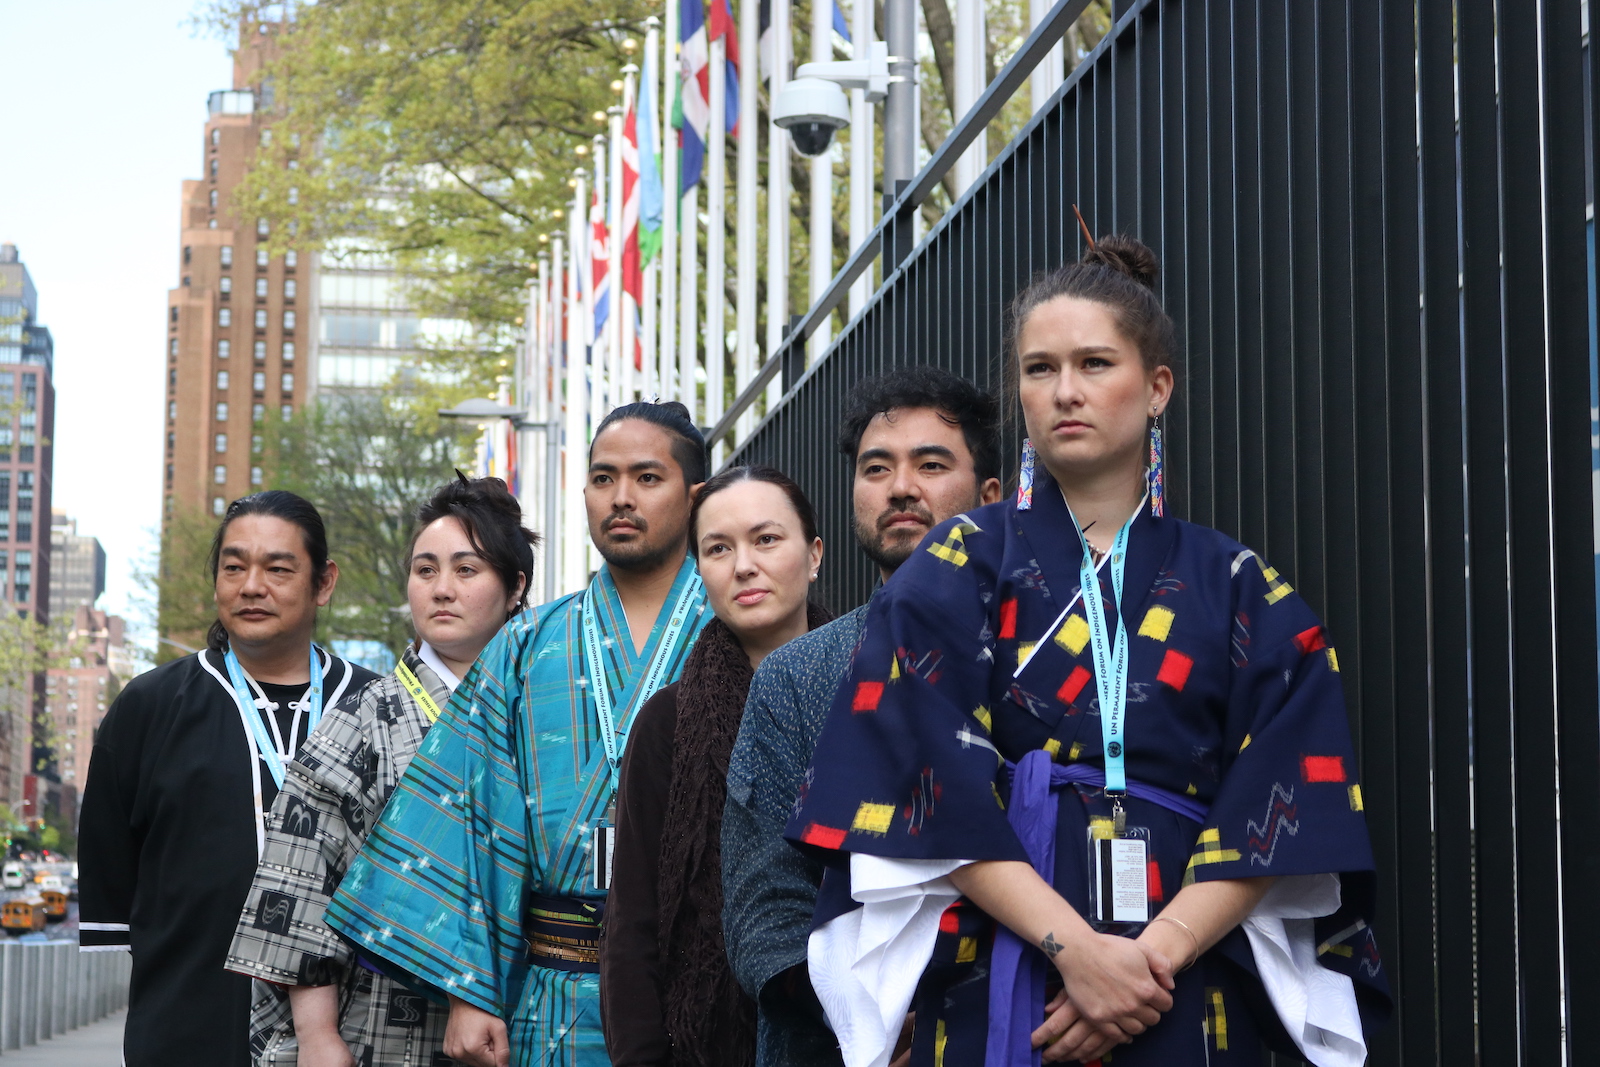 Five people wearing traditional Ryukyuan outfits stand in front of a row of flags at the United Nations, looking off into the distance